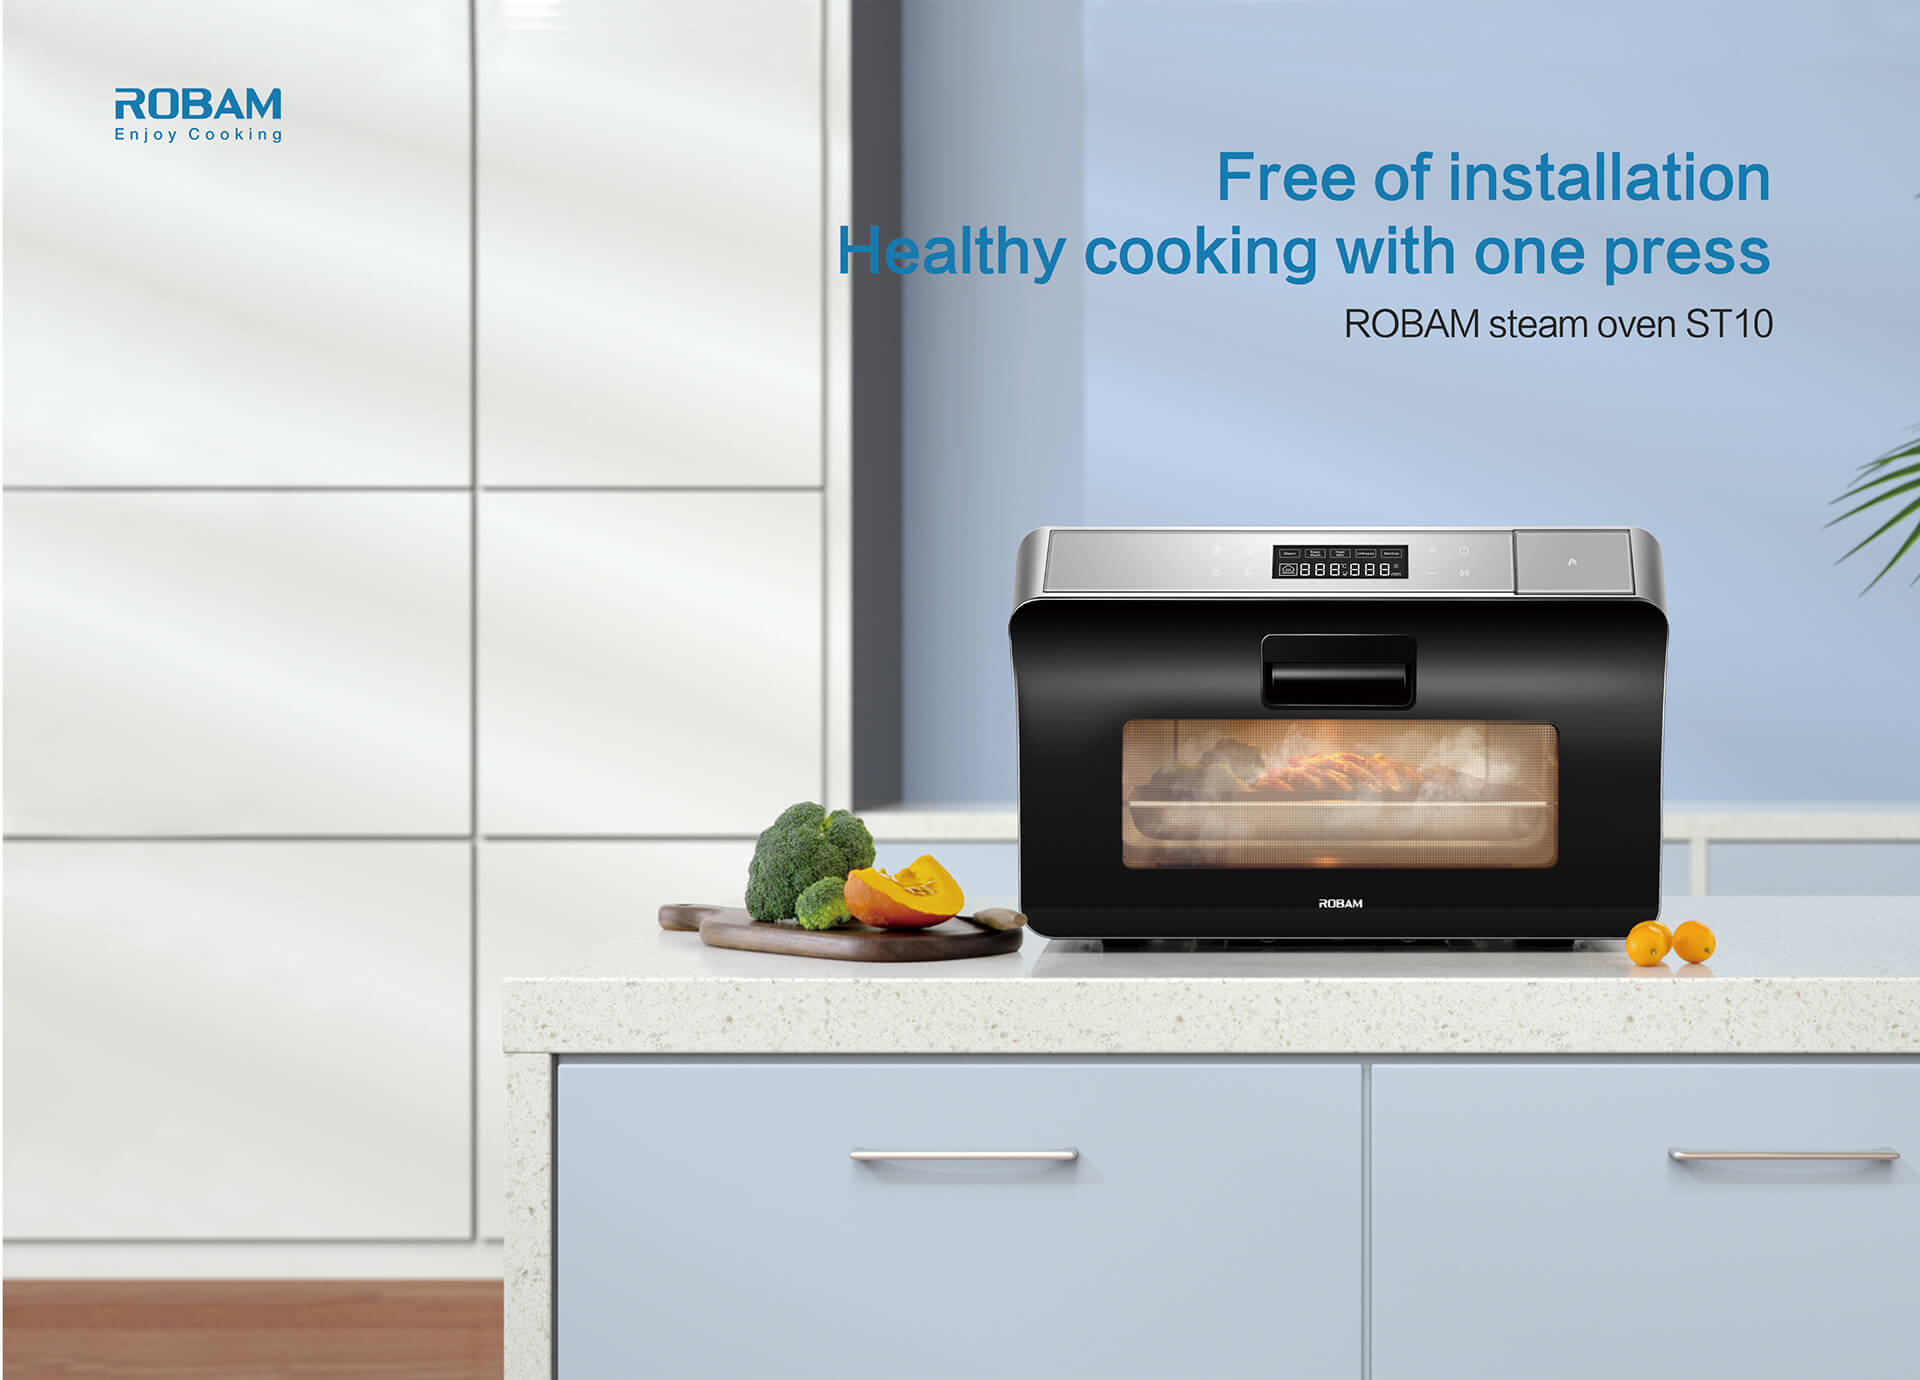 Free of Installation,space is not limited one button for healthy taste<br /><br /><br /><br /><br /><br />
ROBAM steam oven  ST10